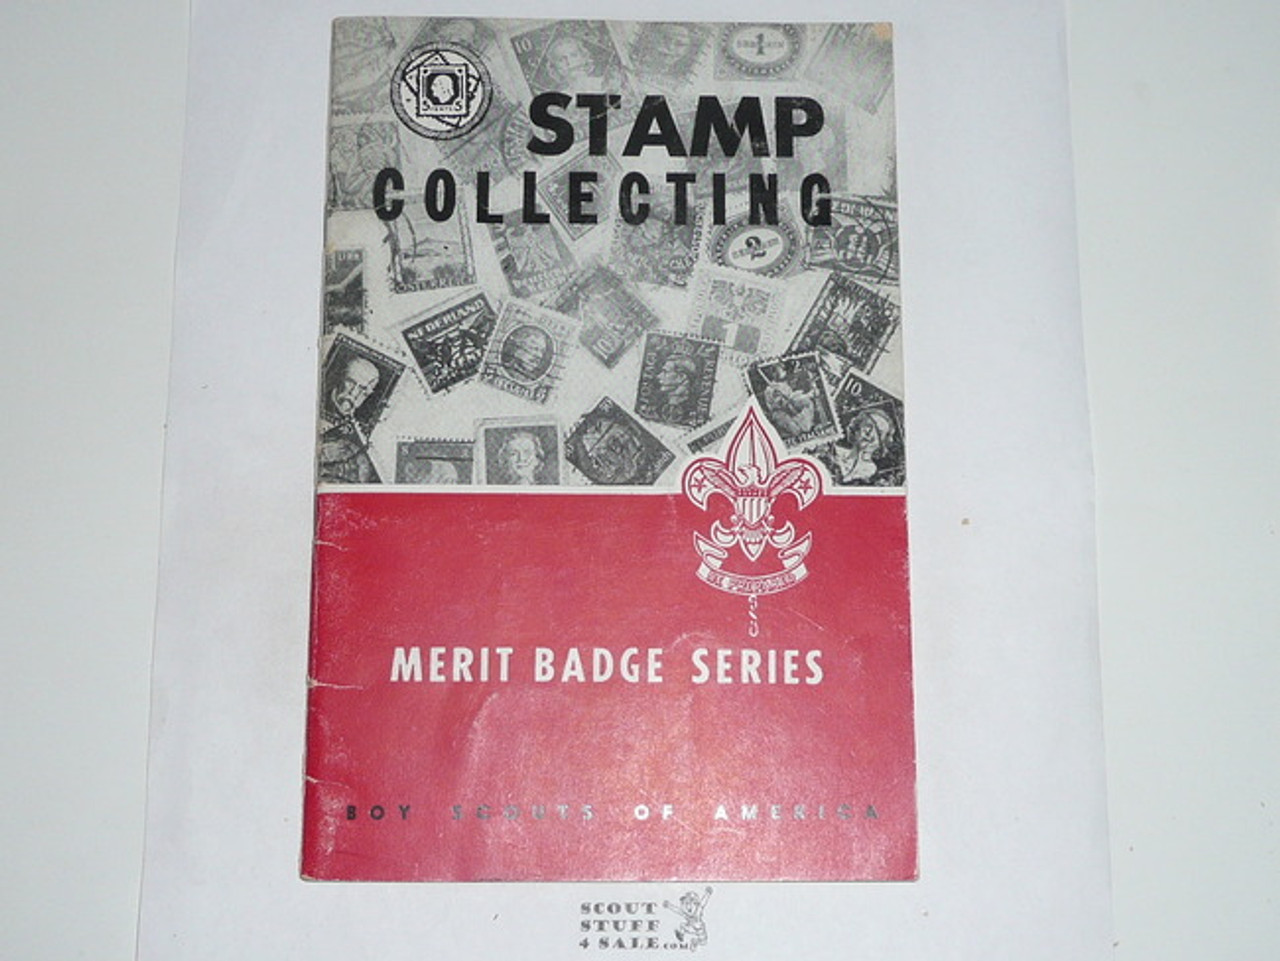 Stamp Collecting Merit Badge Pamphlet, Type 6, Picture Top Red Bottom Cover, 11-56 Printing